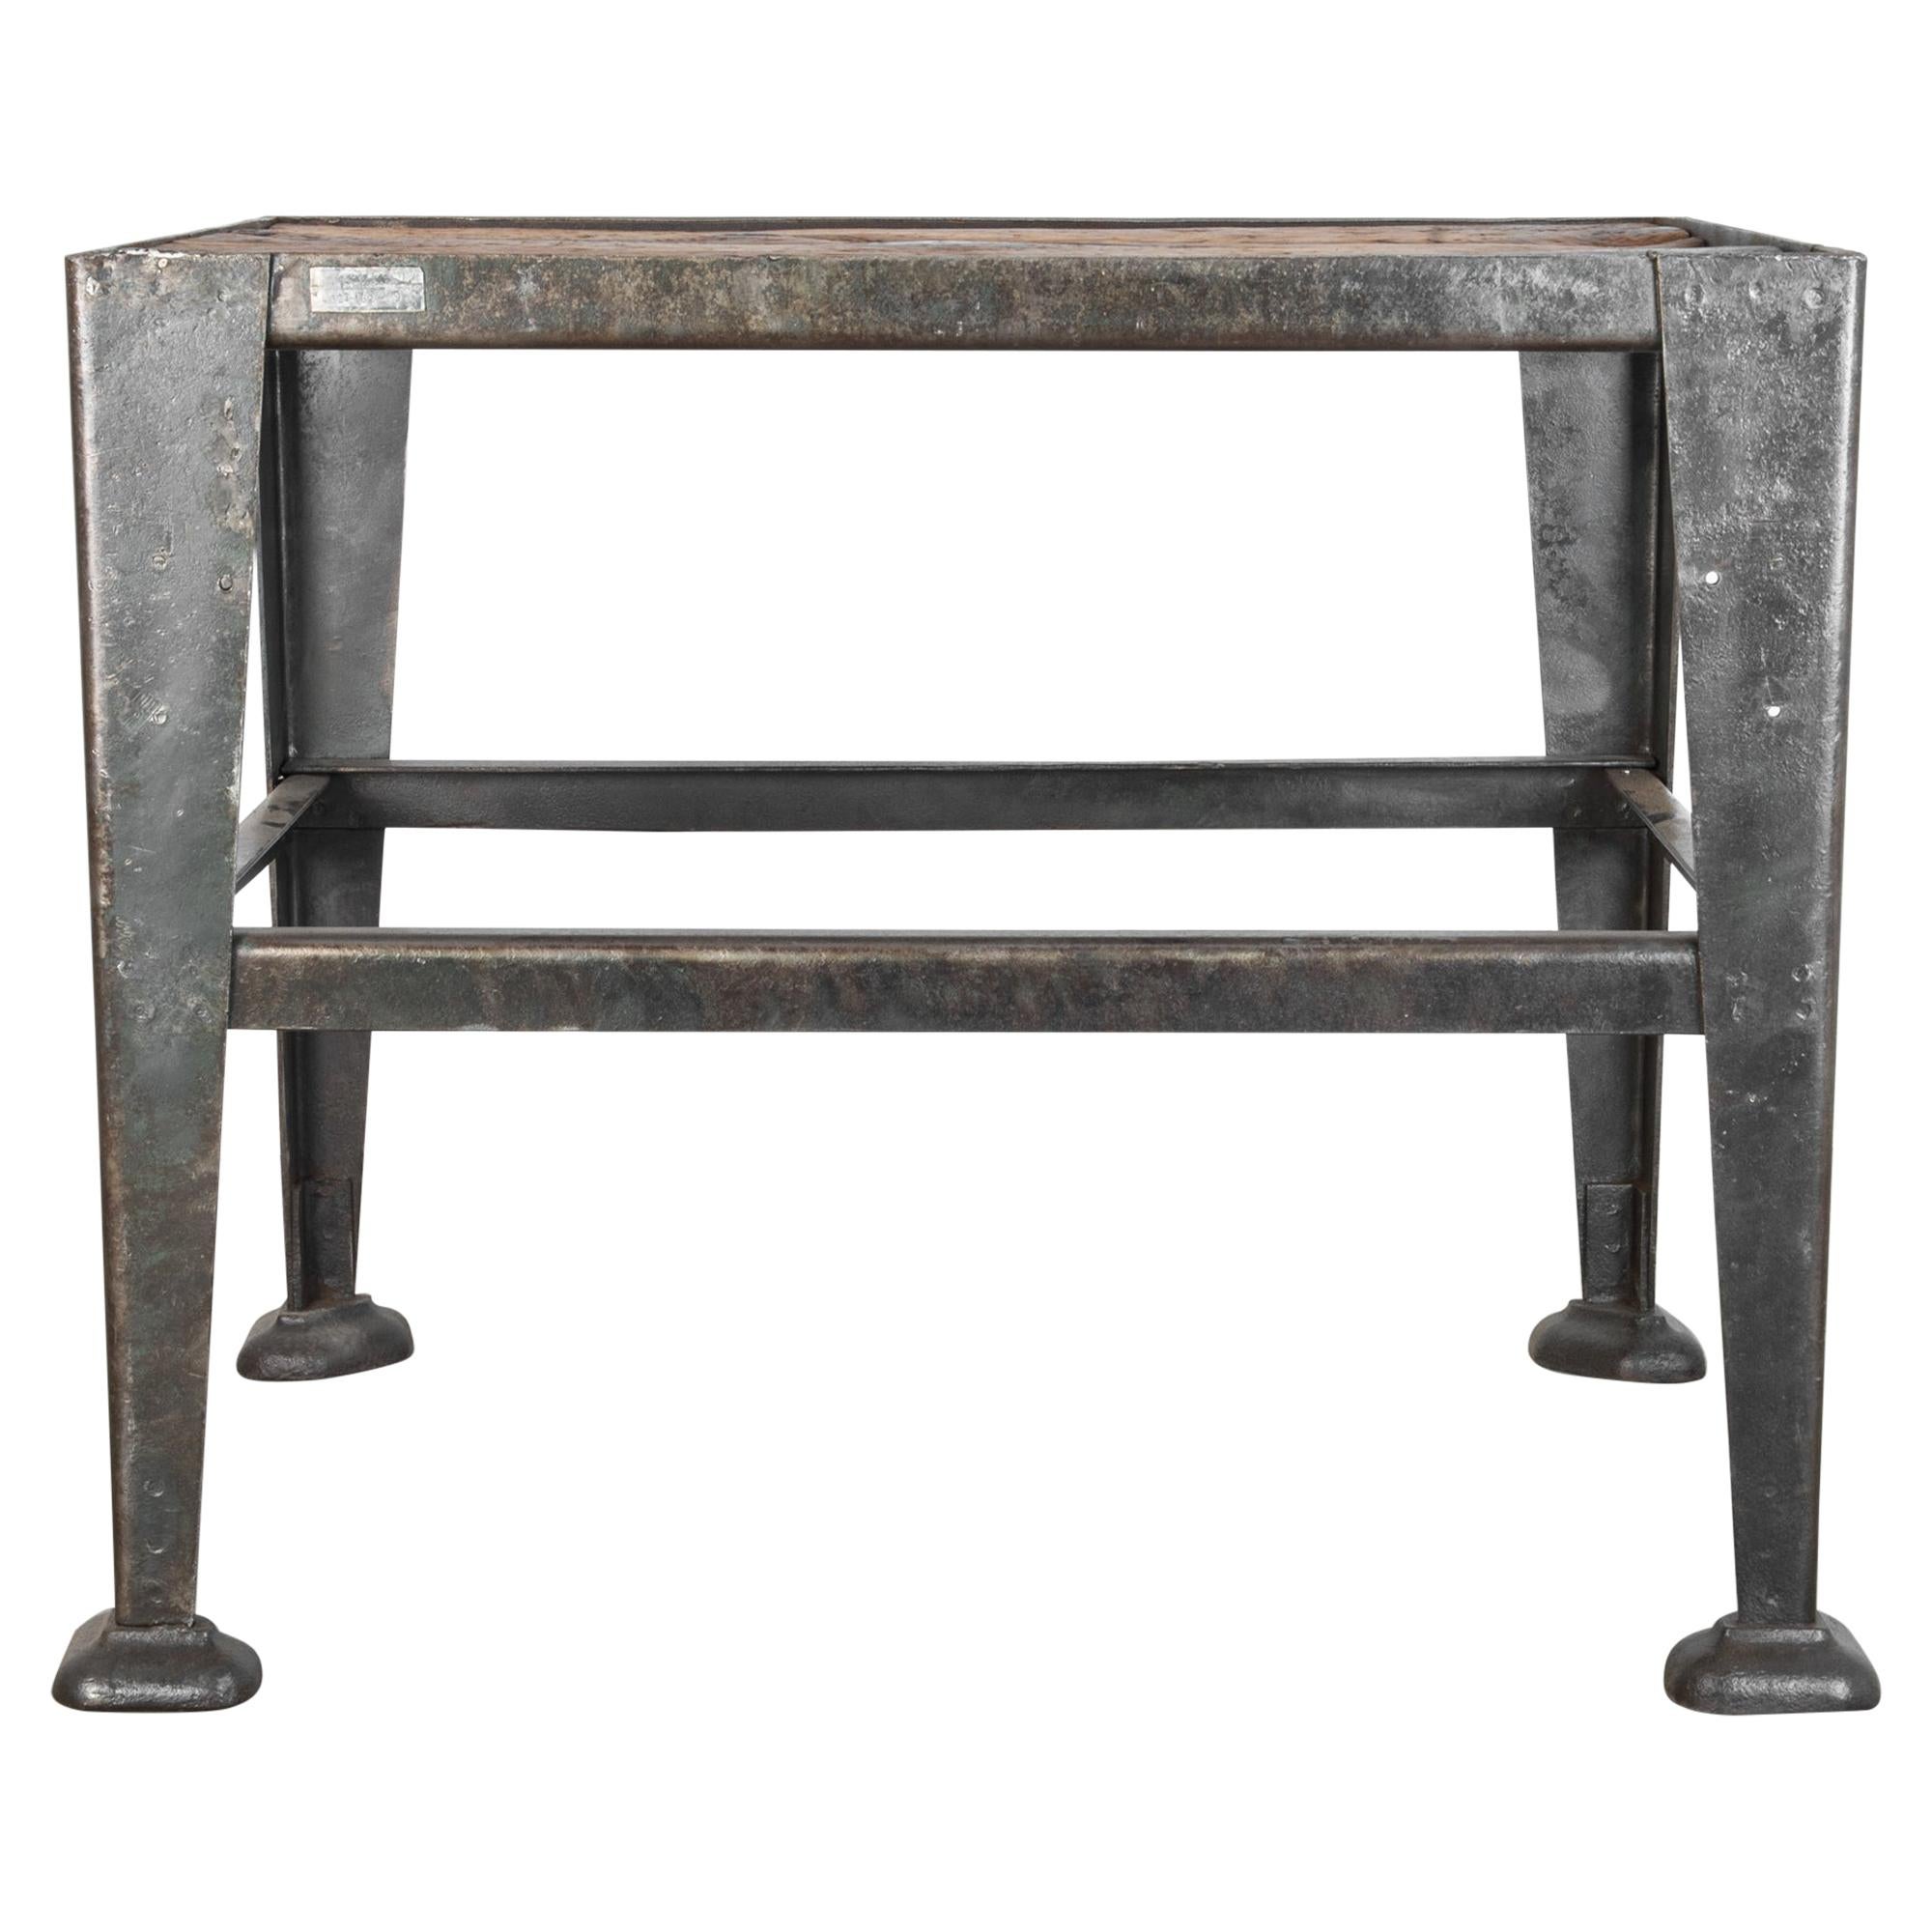 Mid-20th Century Industrial Czech Table